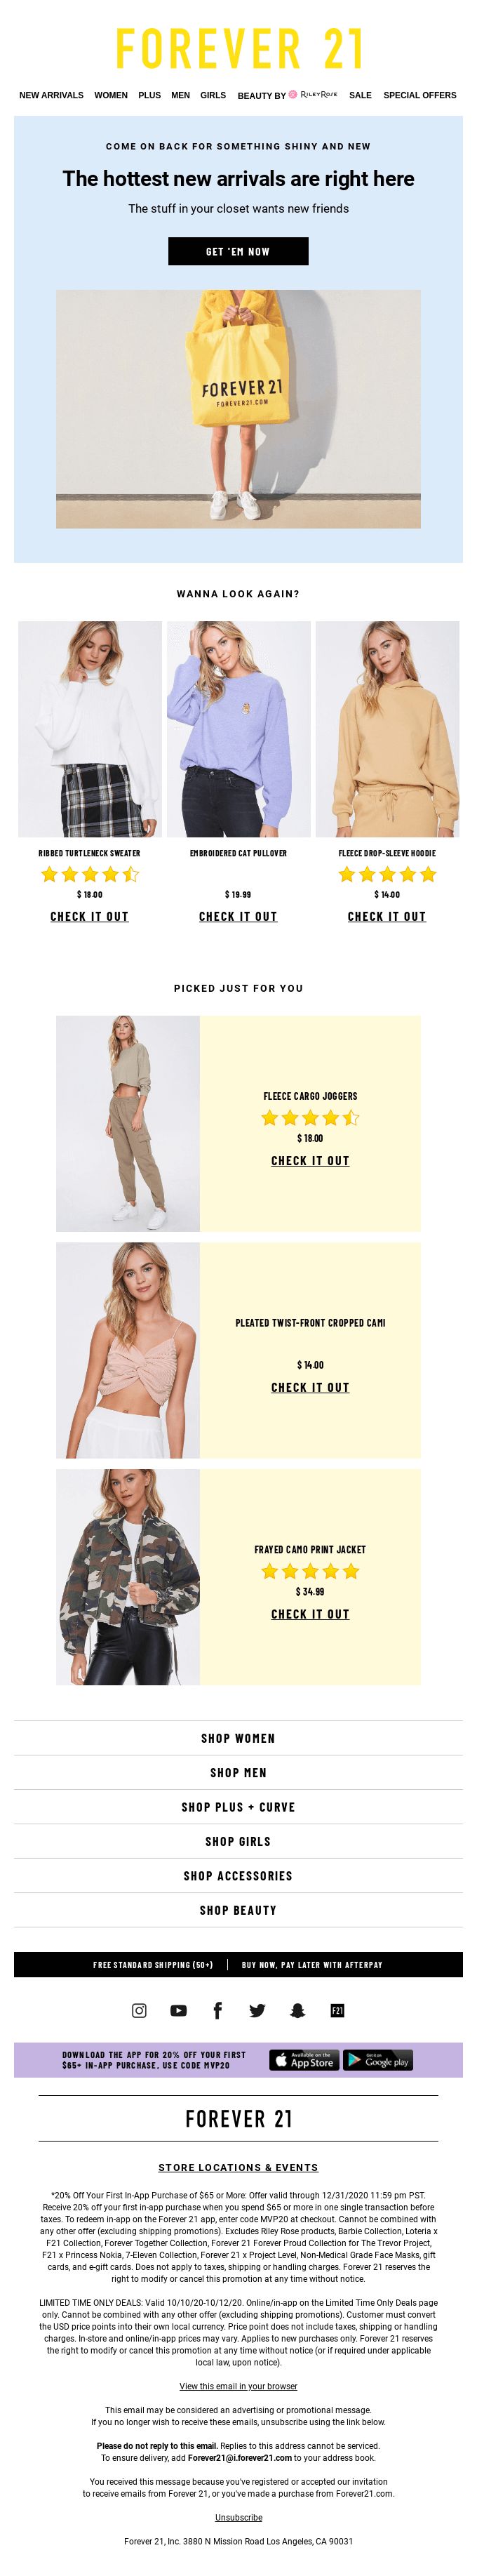 Forever 21_follow-up-email